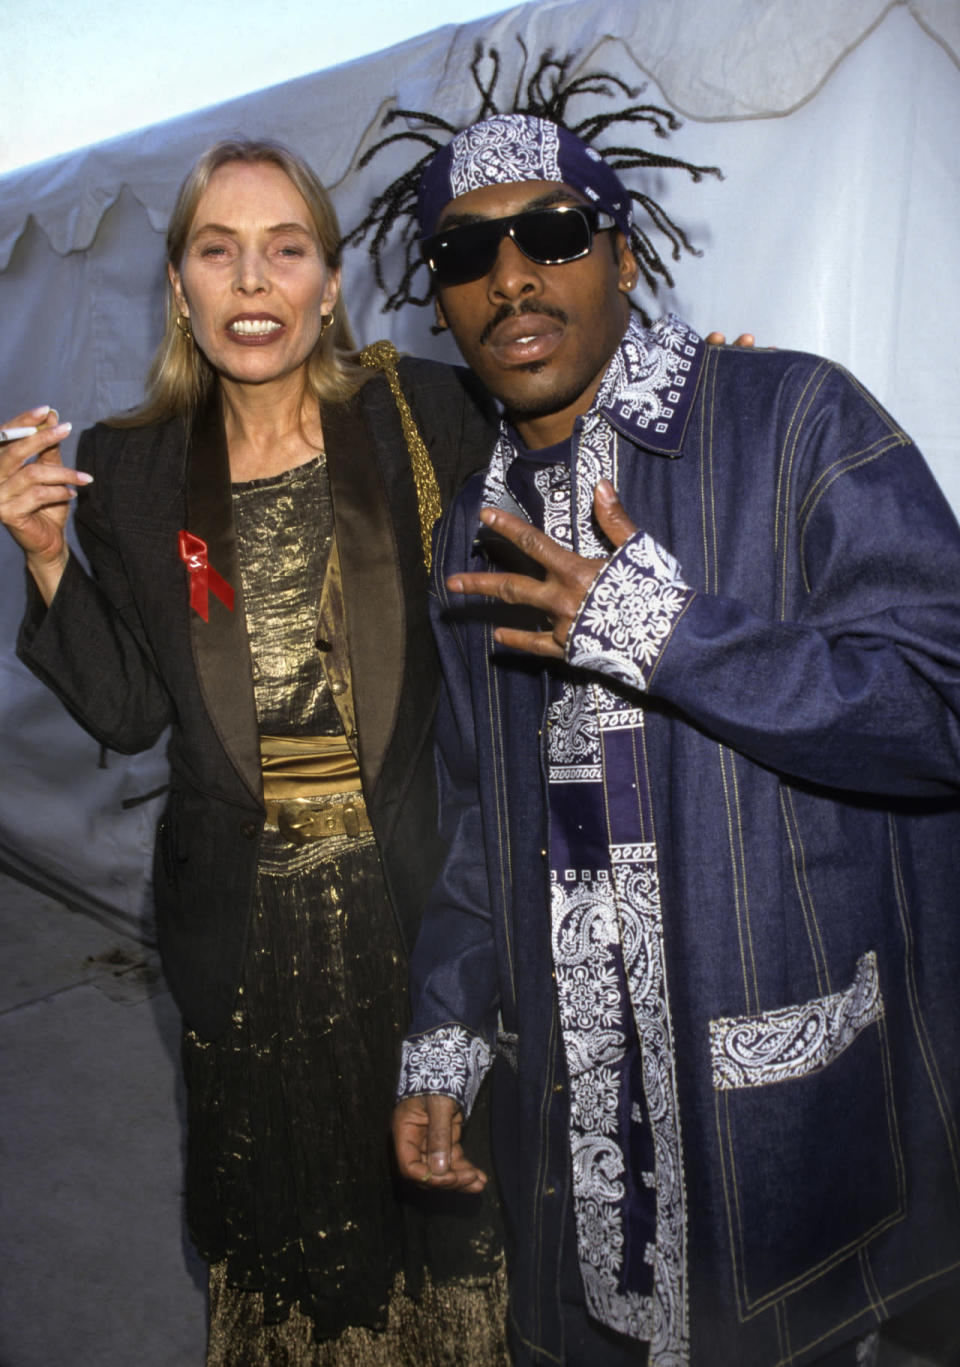 Joni Mitchell and Coolio at the 1996 Grammy Awards.